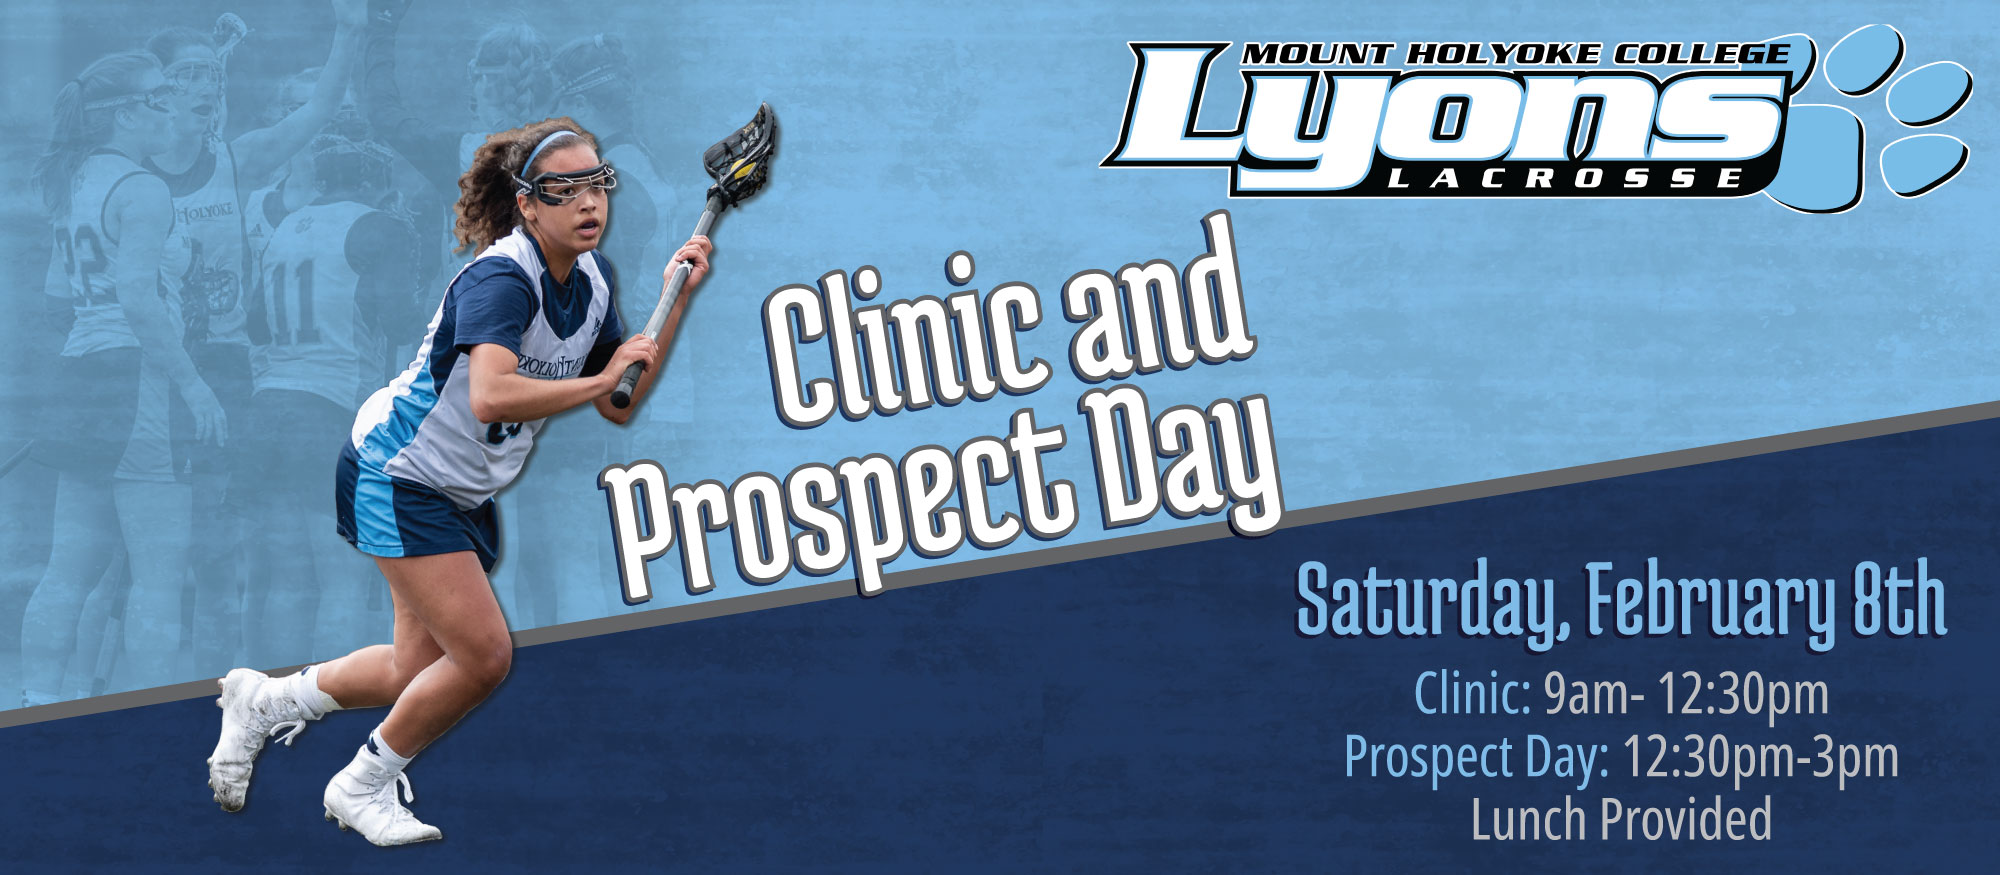 Lacrosse to Host Clinic and Prospect Day on Saturday, February 8